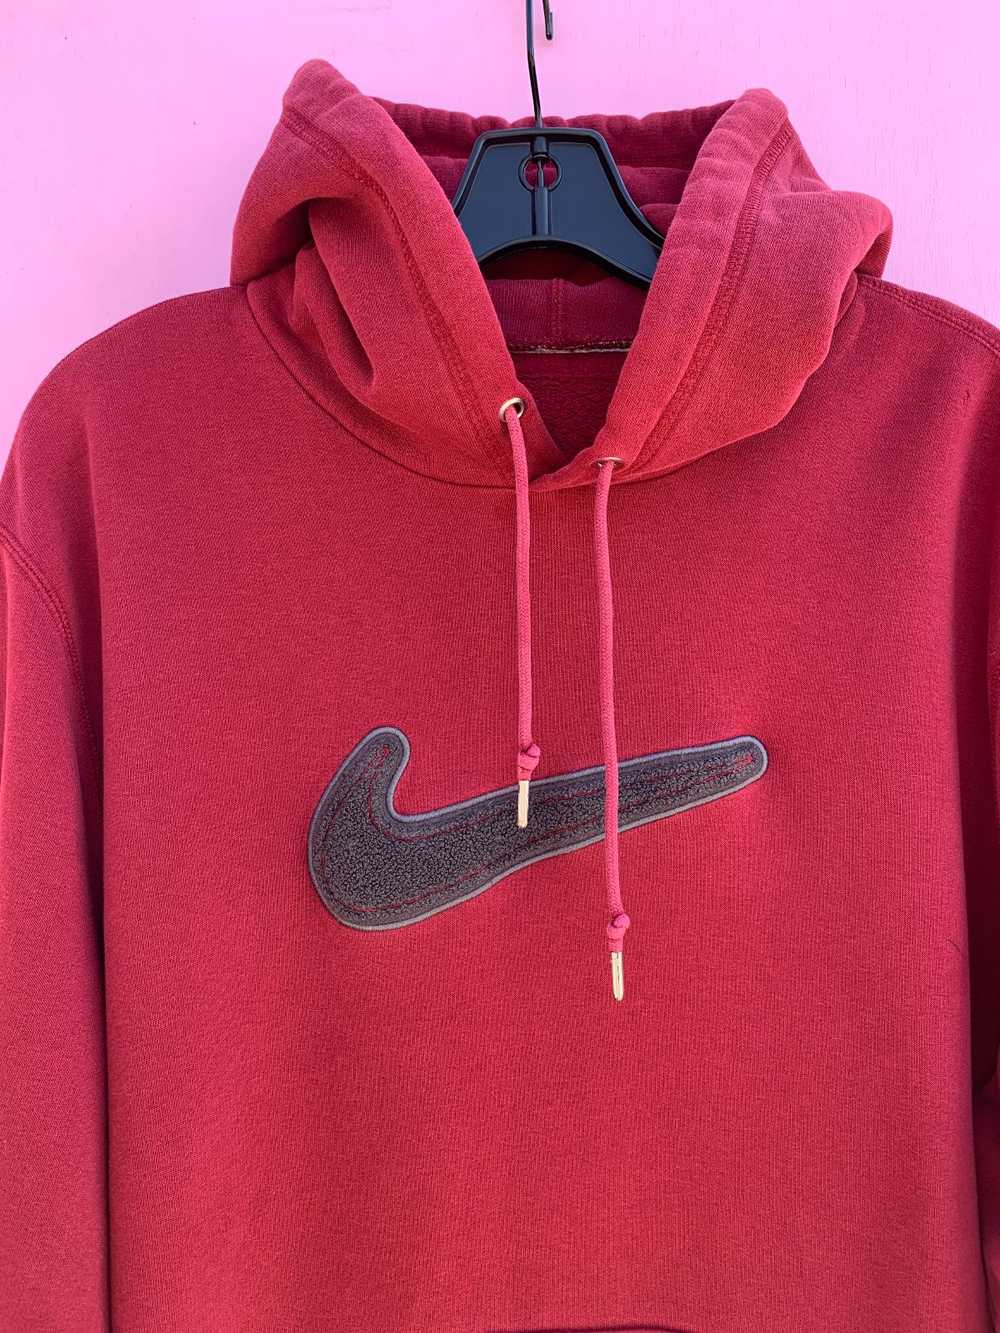 CHENILLE EMBROIDERED NIKE SWOOSH PULLOVER HOODED … - image 2